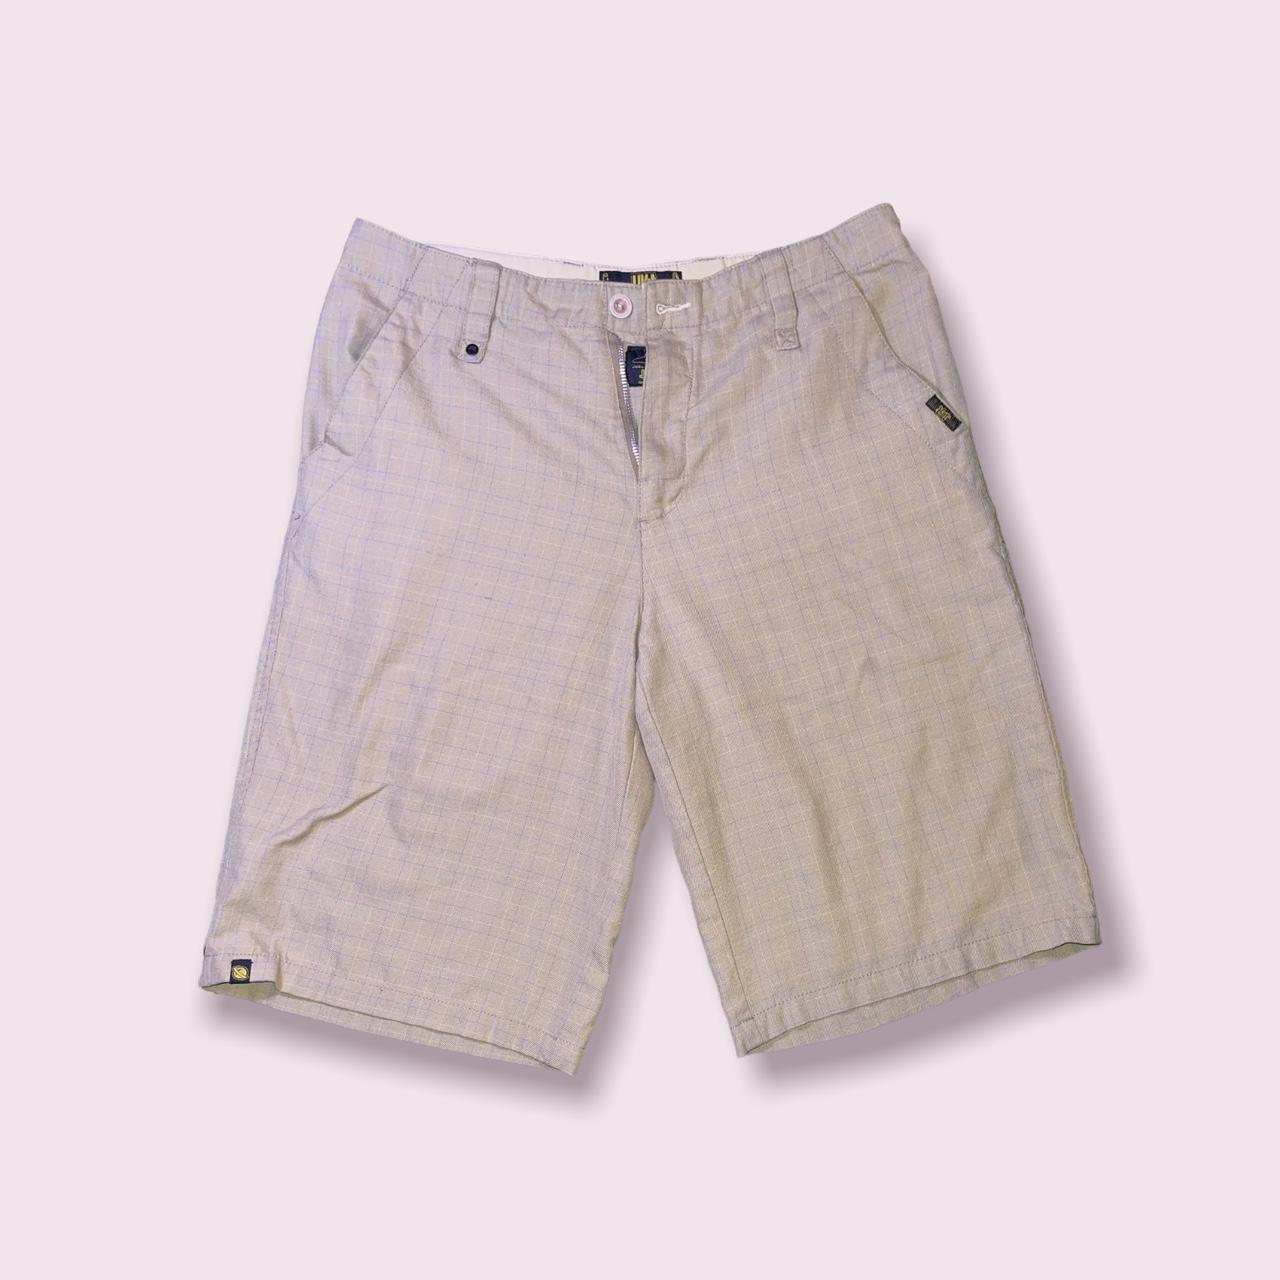 Lost Ink Men's Cream and White Shorts